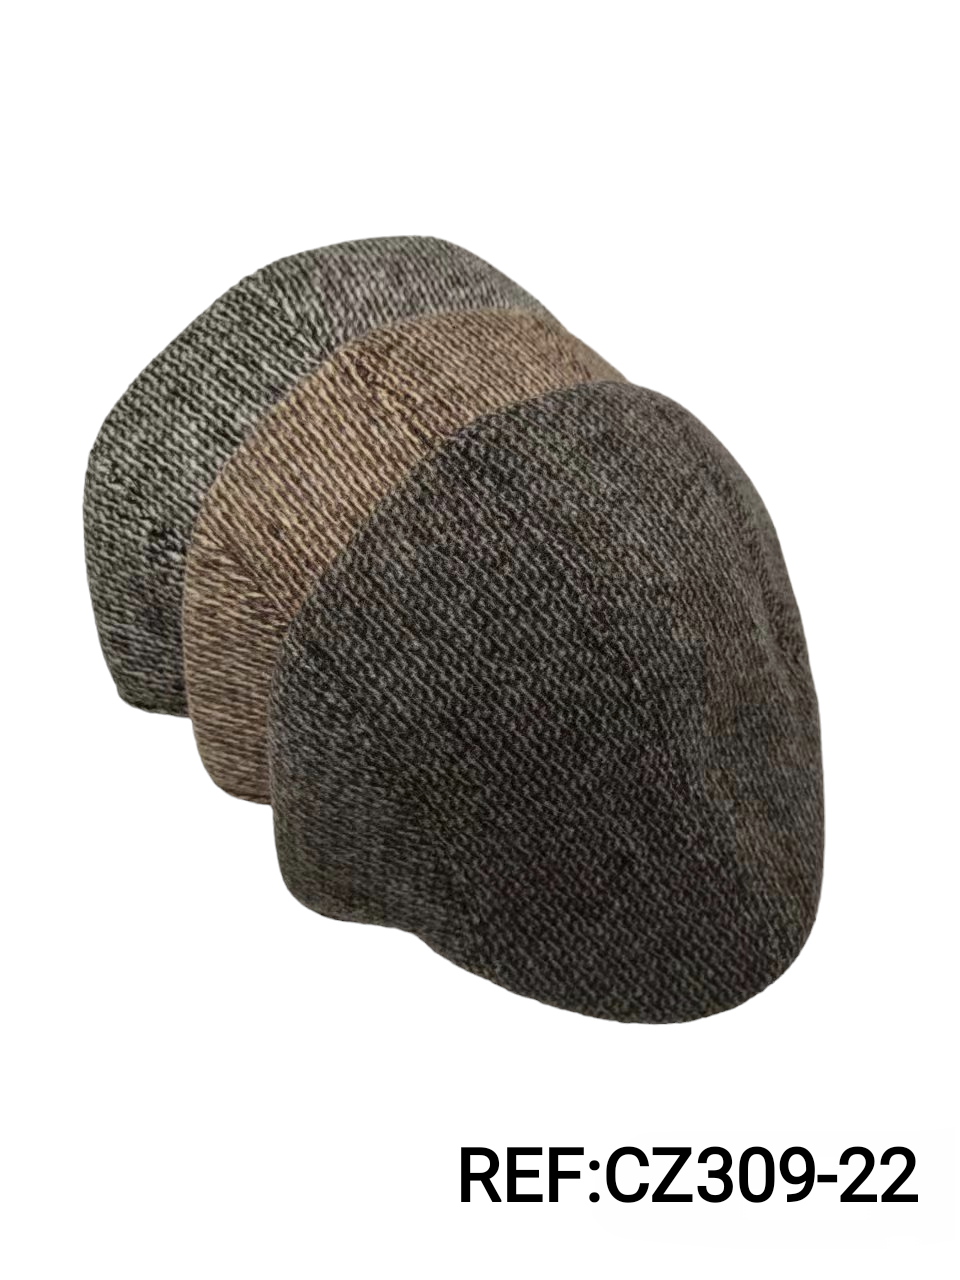 Men's beret with houndstooth pattern (x12)#22